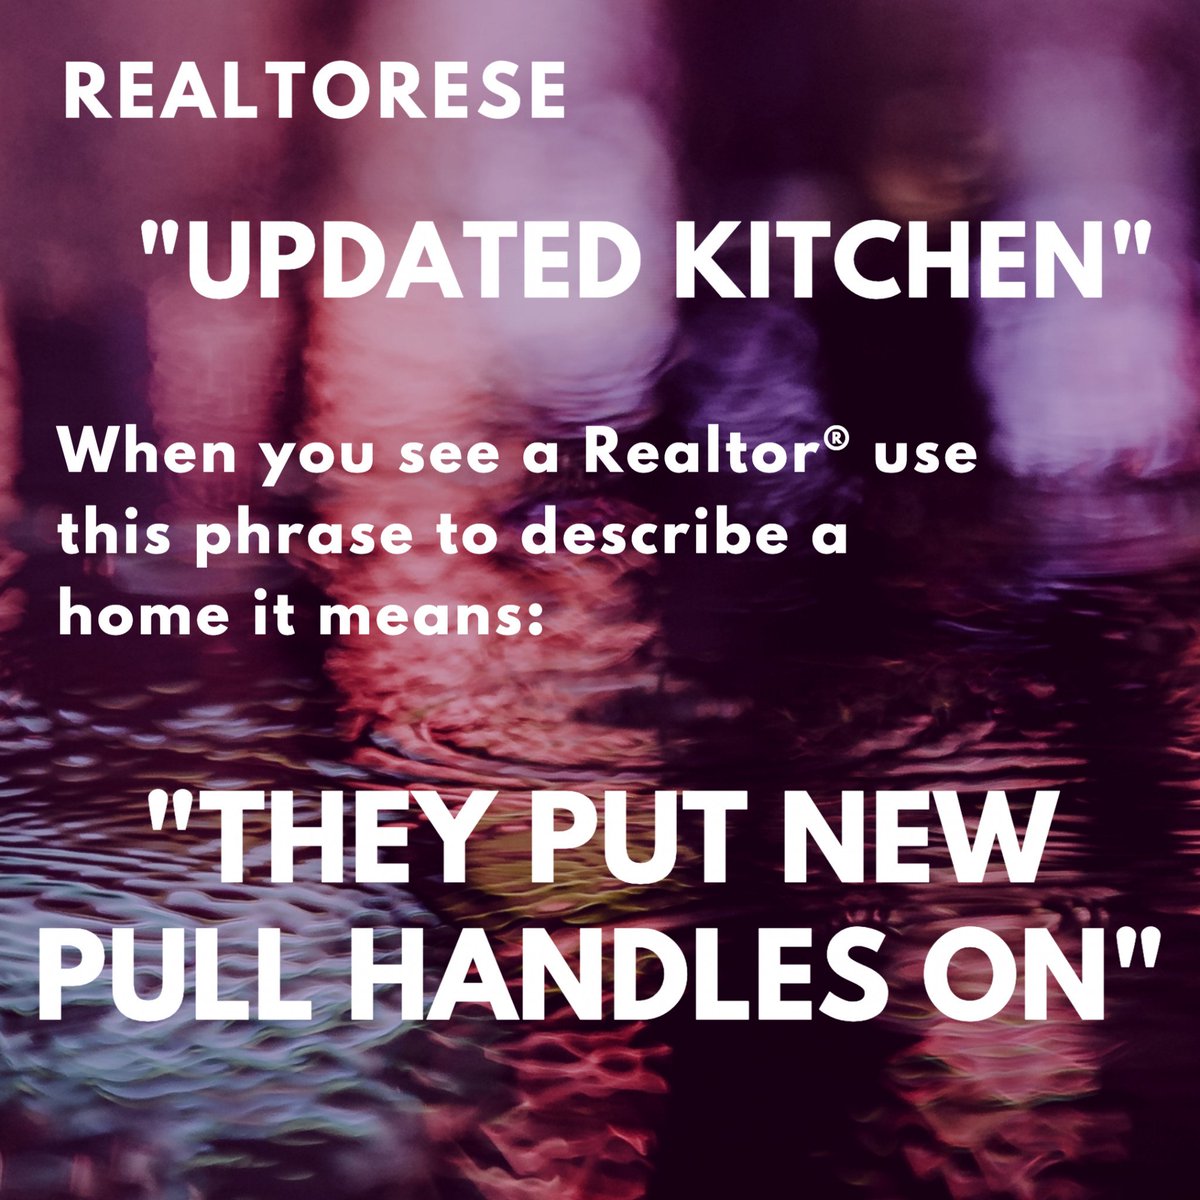 Sometimes Realtors® try to make a house sound better than it is.  Be on the lookout for that 'updated kitchen' #abetterqualityexperience #dowork #jeremypoehlsrealtor #thejasonwitteteam #chandlerrealestate #gilbertrealestate #mesarealestate #temperealestate #scottsdalerealestate